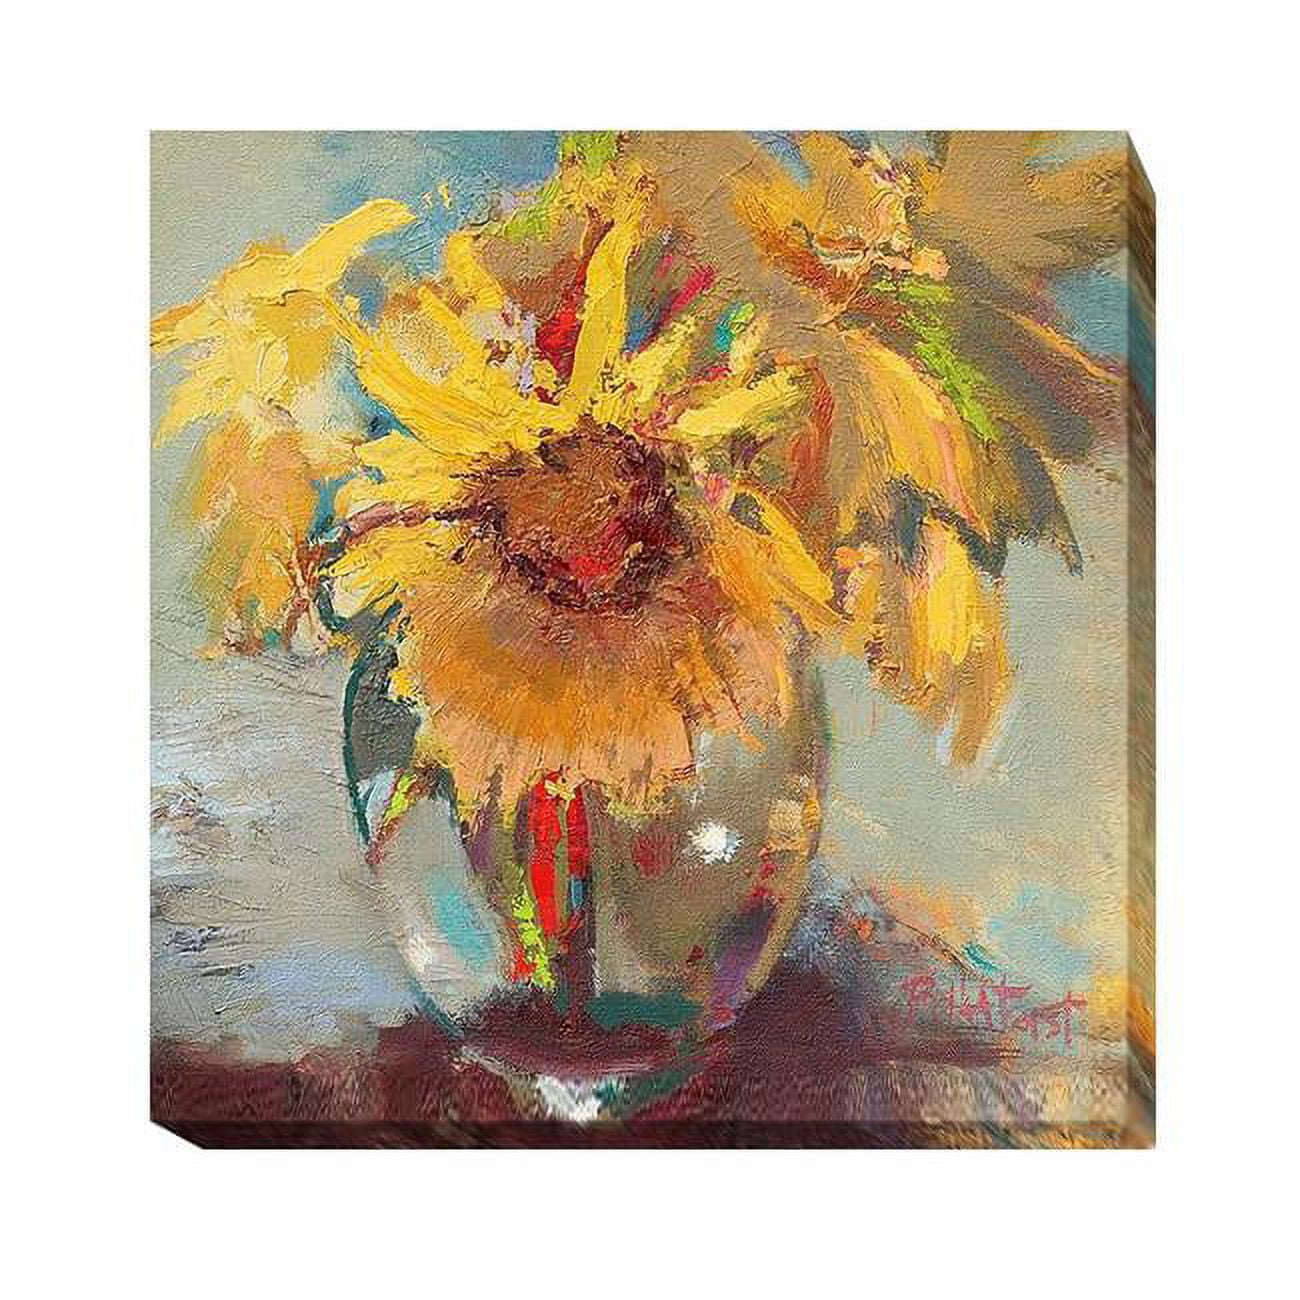 1212q195ig Water Globe Blossoms By Beth A. Forst Premium Gallery-wrapped Canvas Giclee Art - 12 X 12 X 1.5 In.